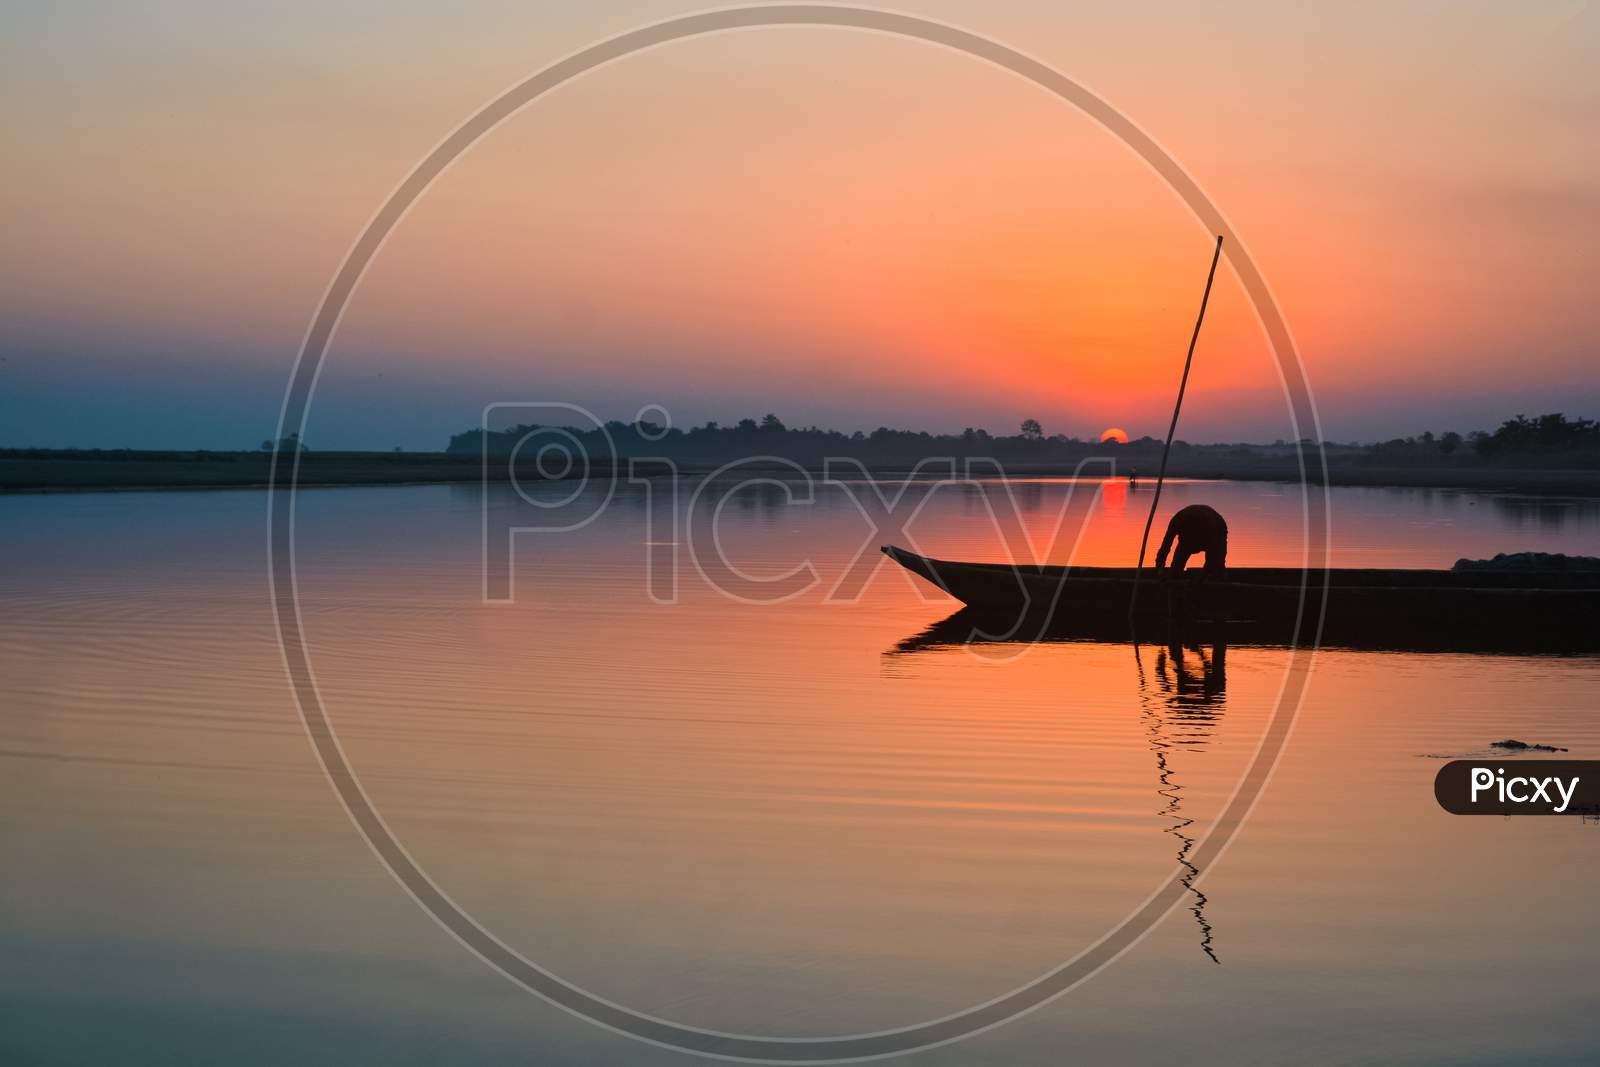 A fishermen with his boat on the River Brahmaputra at Sunset.